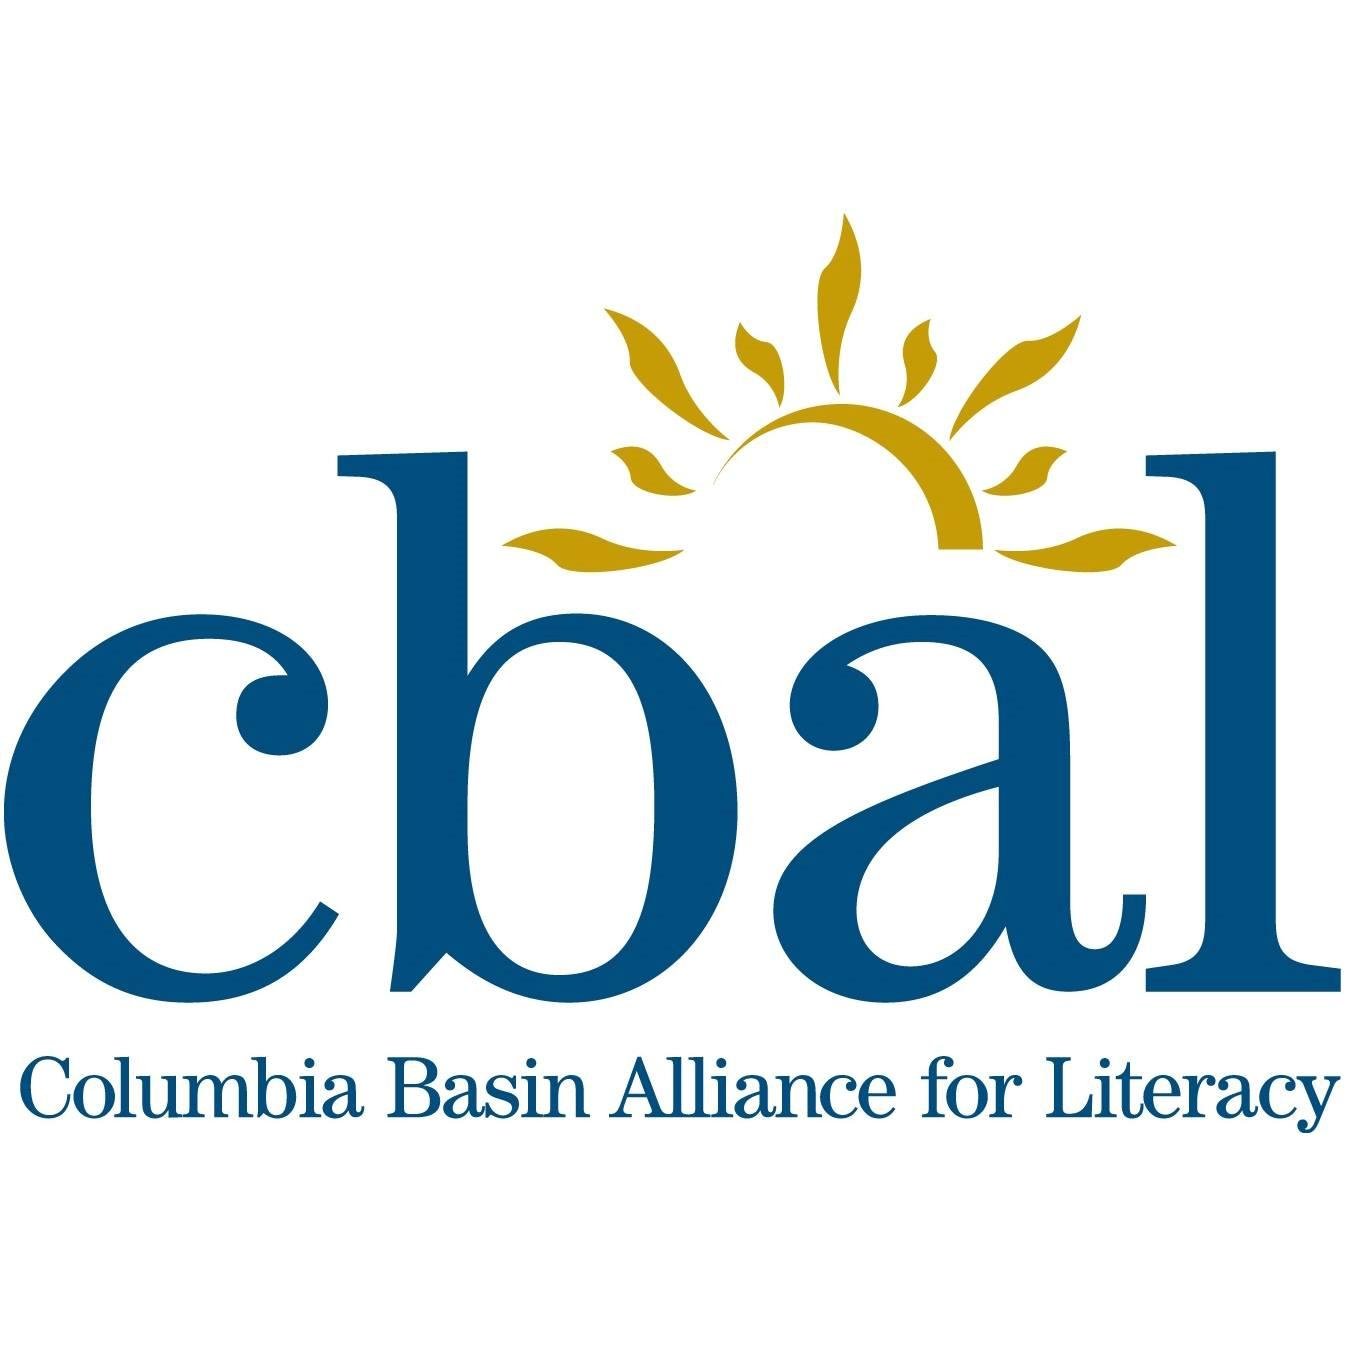 CBAL is the Columbia Basin & Boundary region's not-for-proft literacy organization. We help all citizens to improve literacy skills & promote lifelong learning.